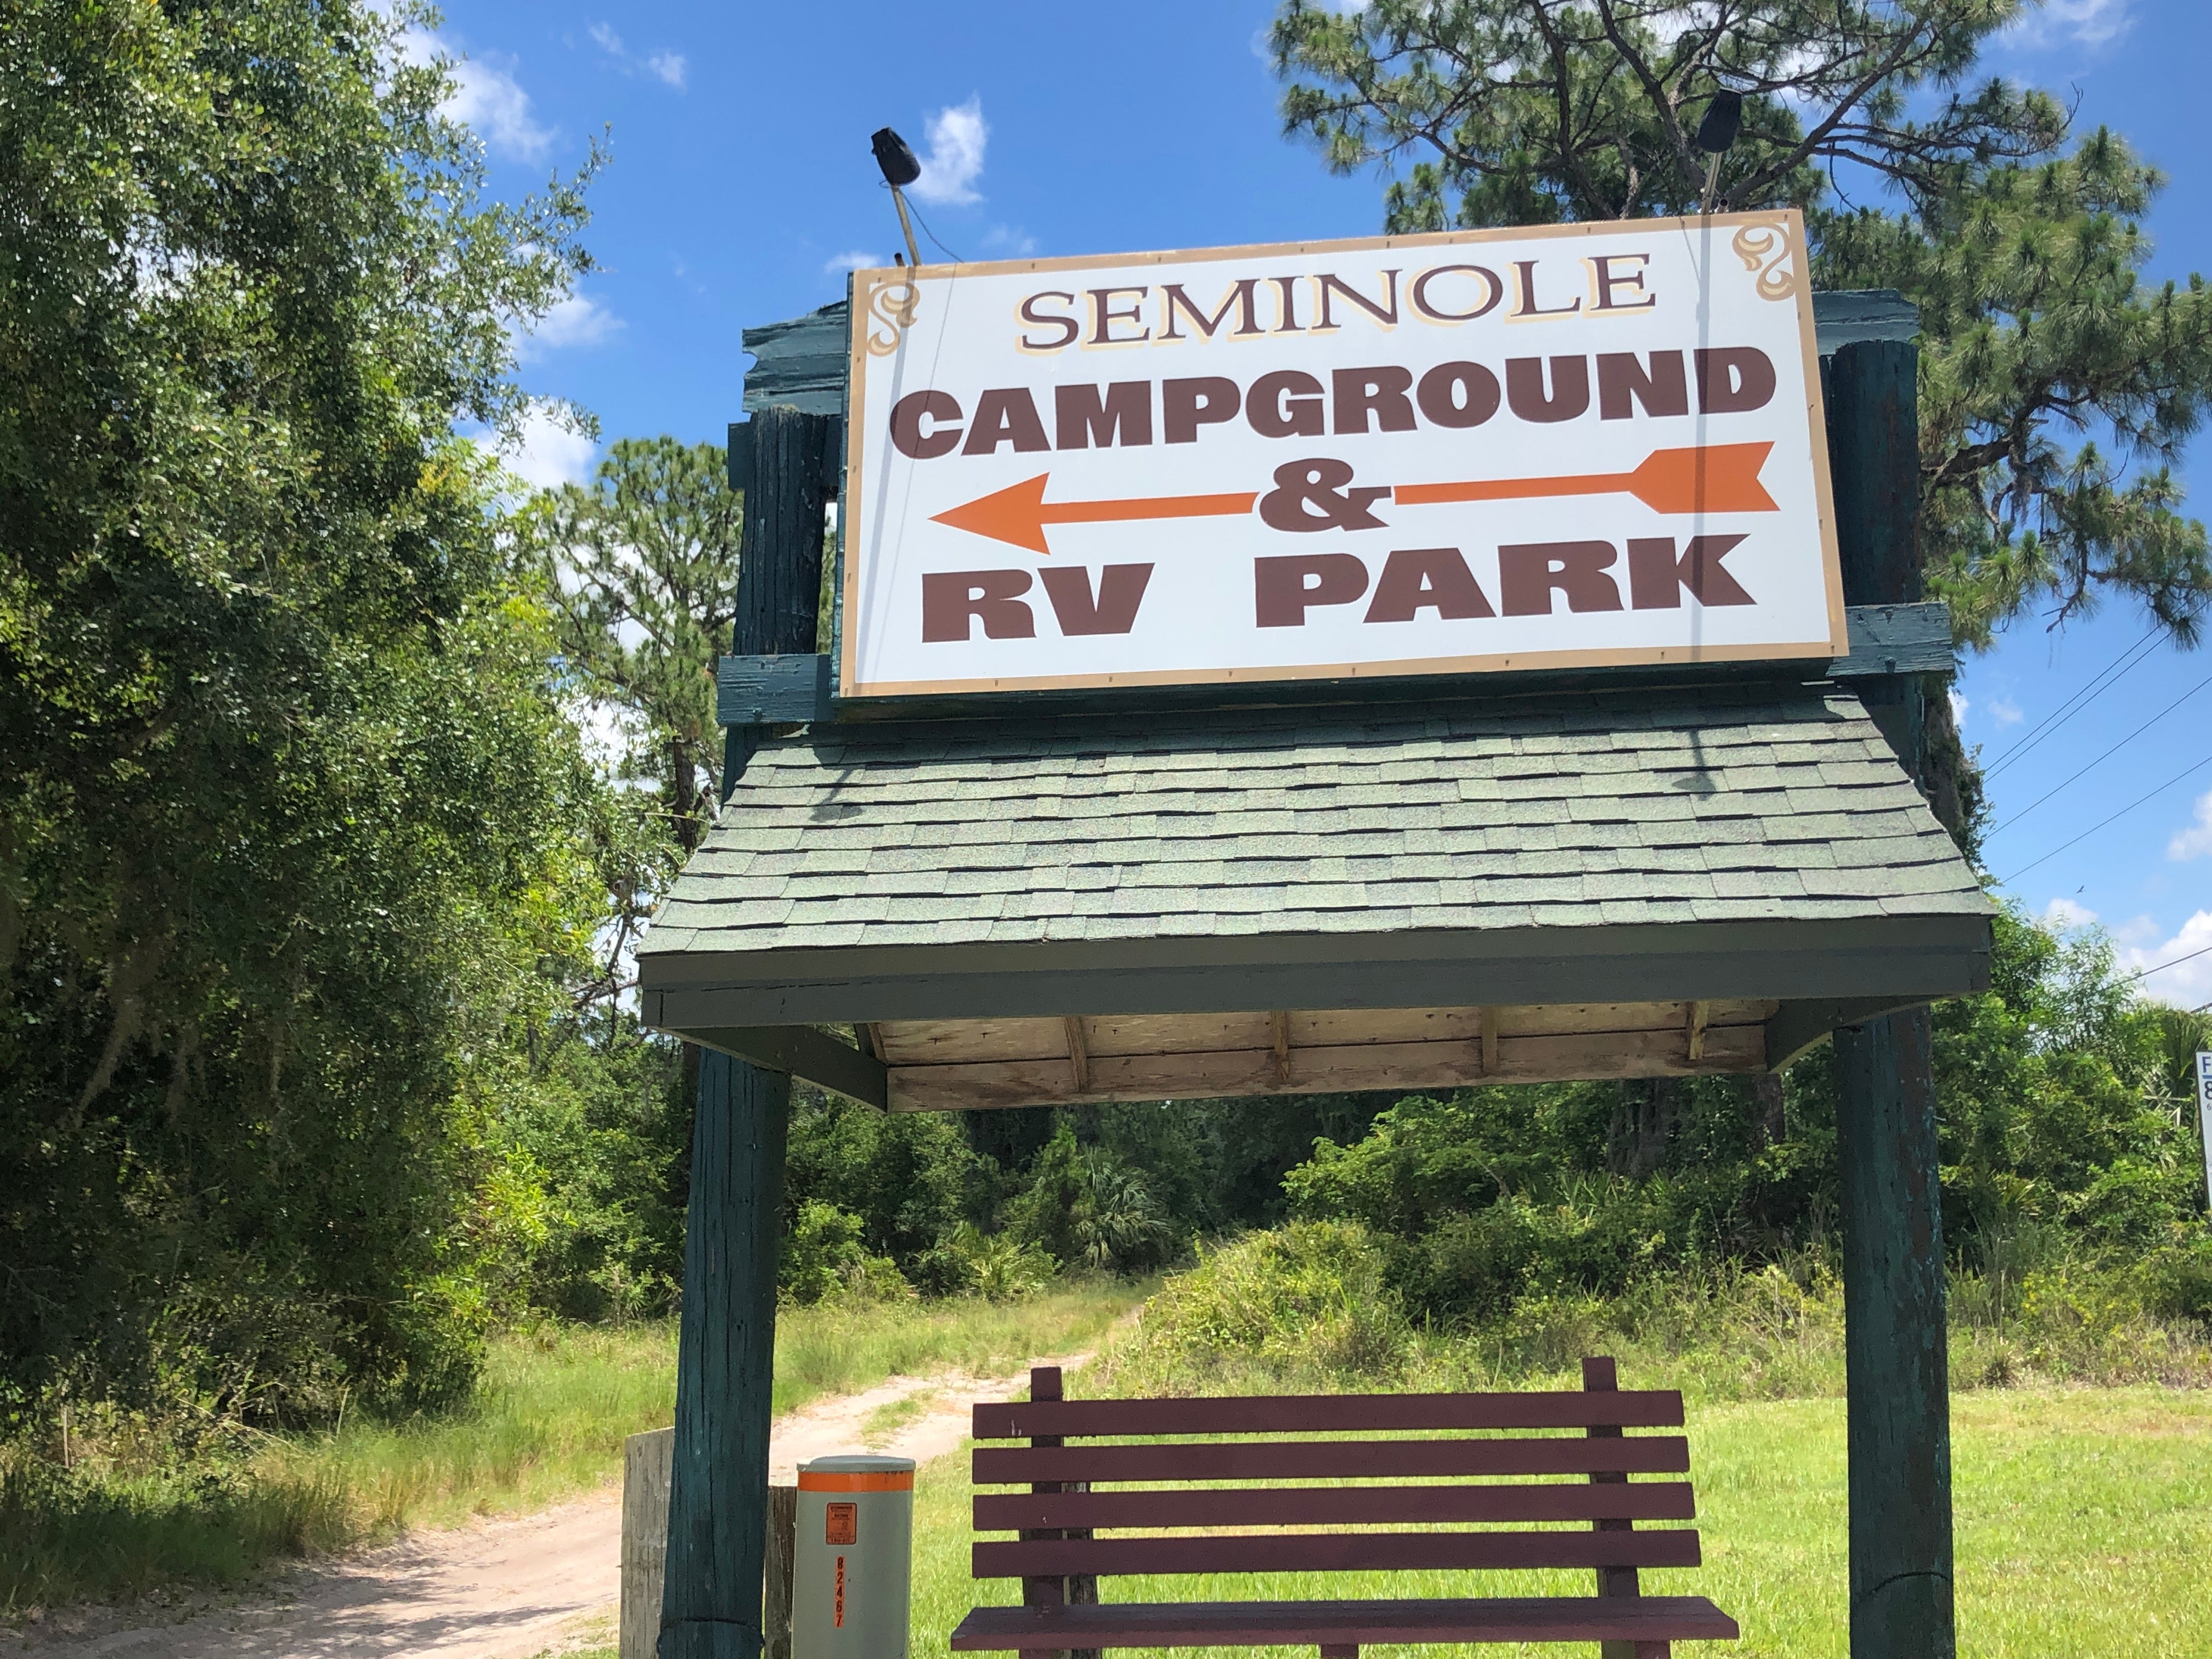 The sign for the campground on hwy 78 just near the I-75 on ramp